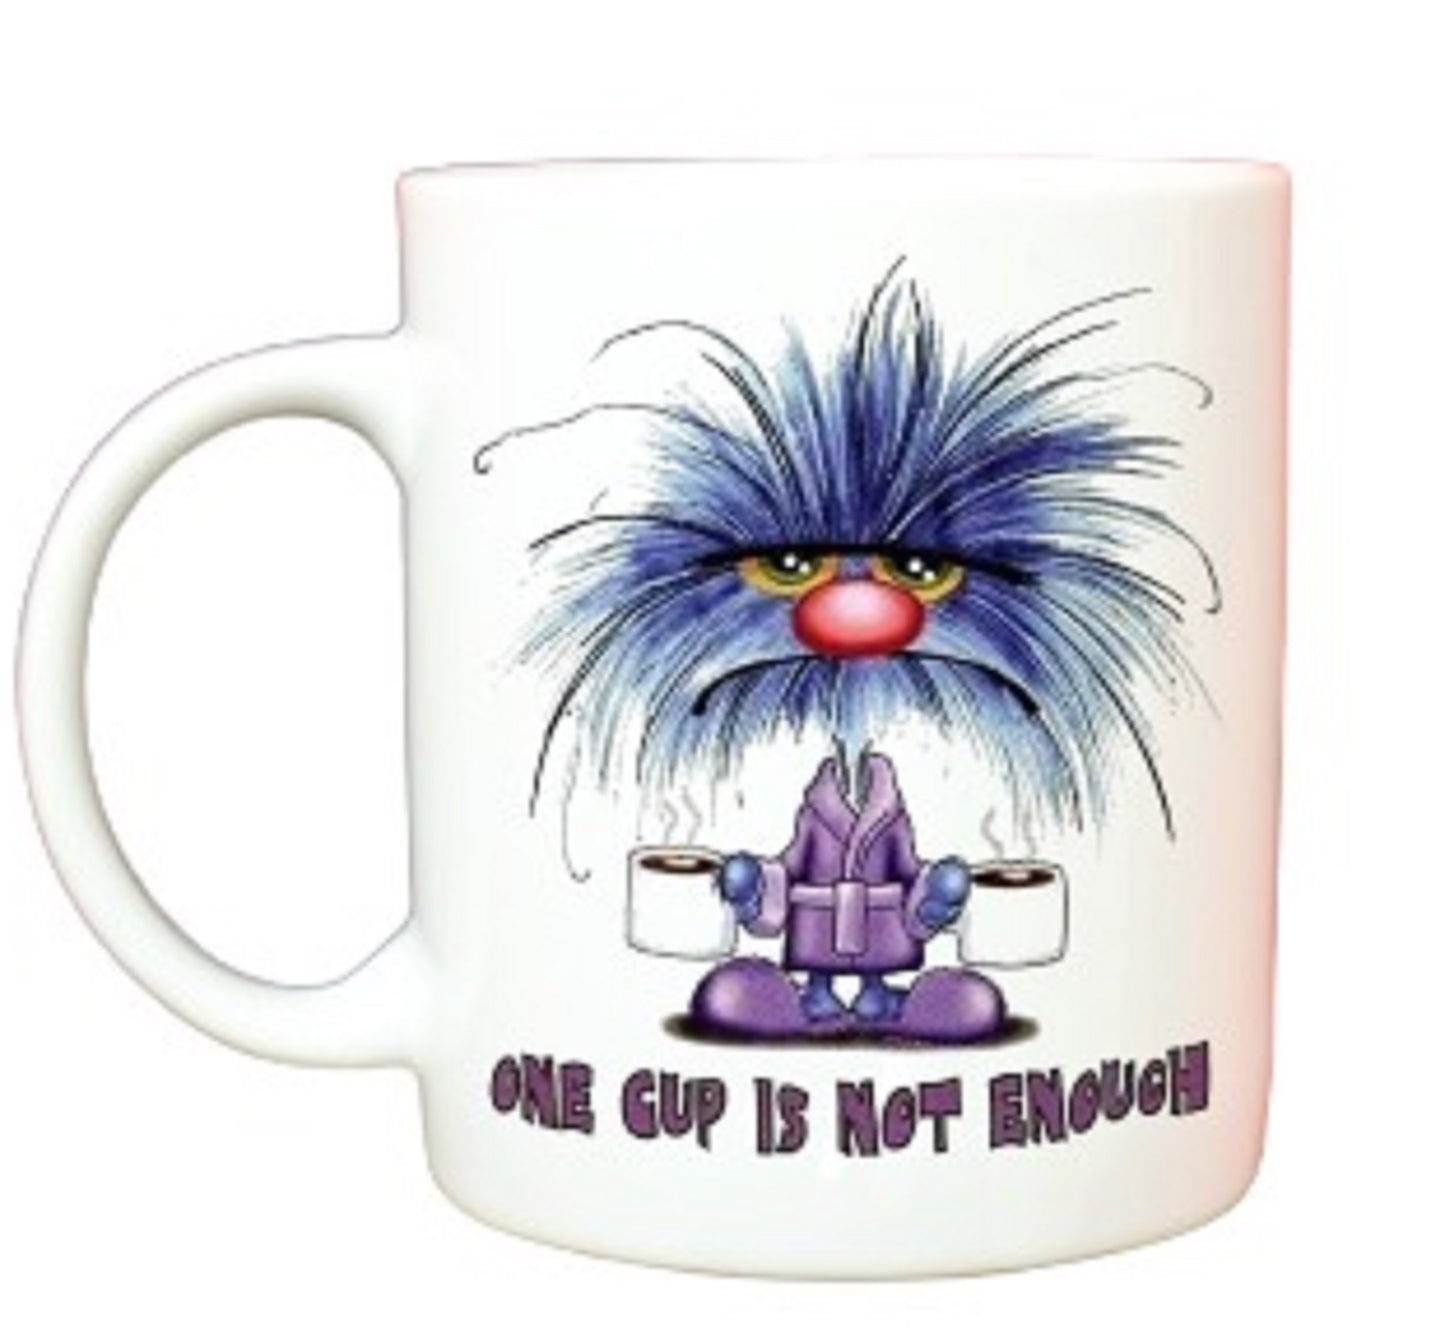  Gonk One Cup is not Enough Coffee Mug by Free Spirit Accessories sold by Free Spirit Accessories